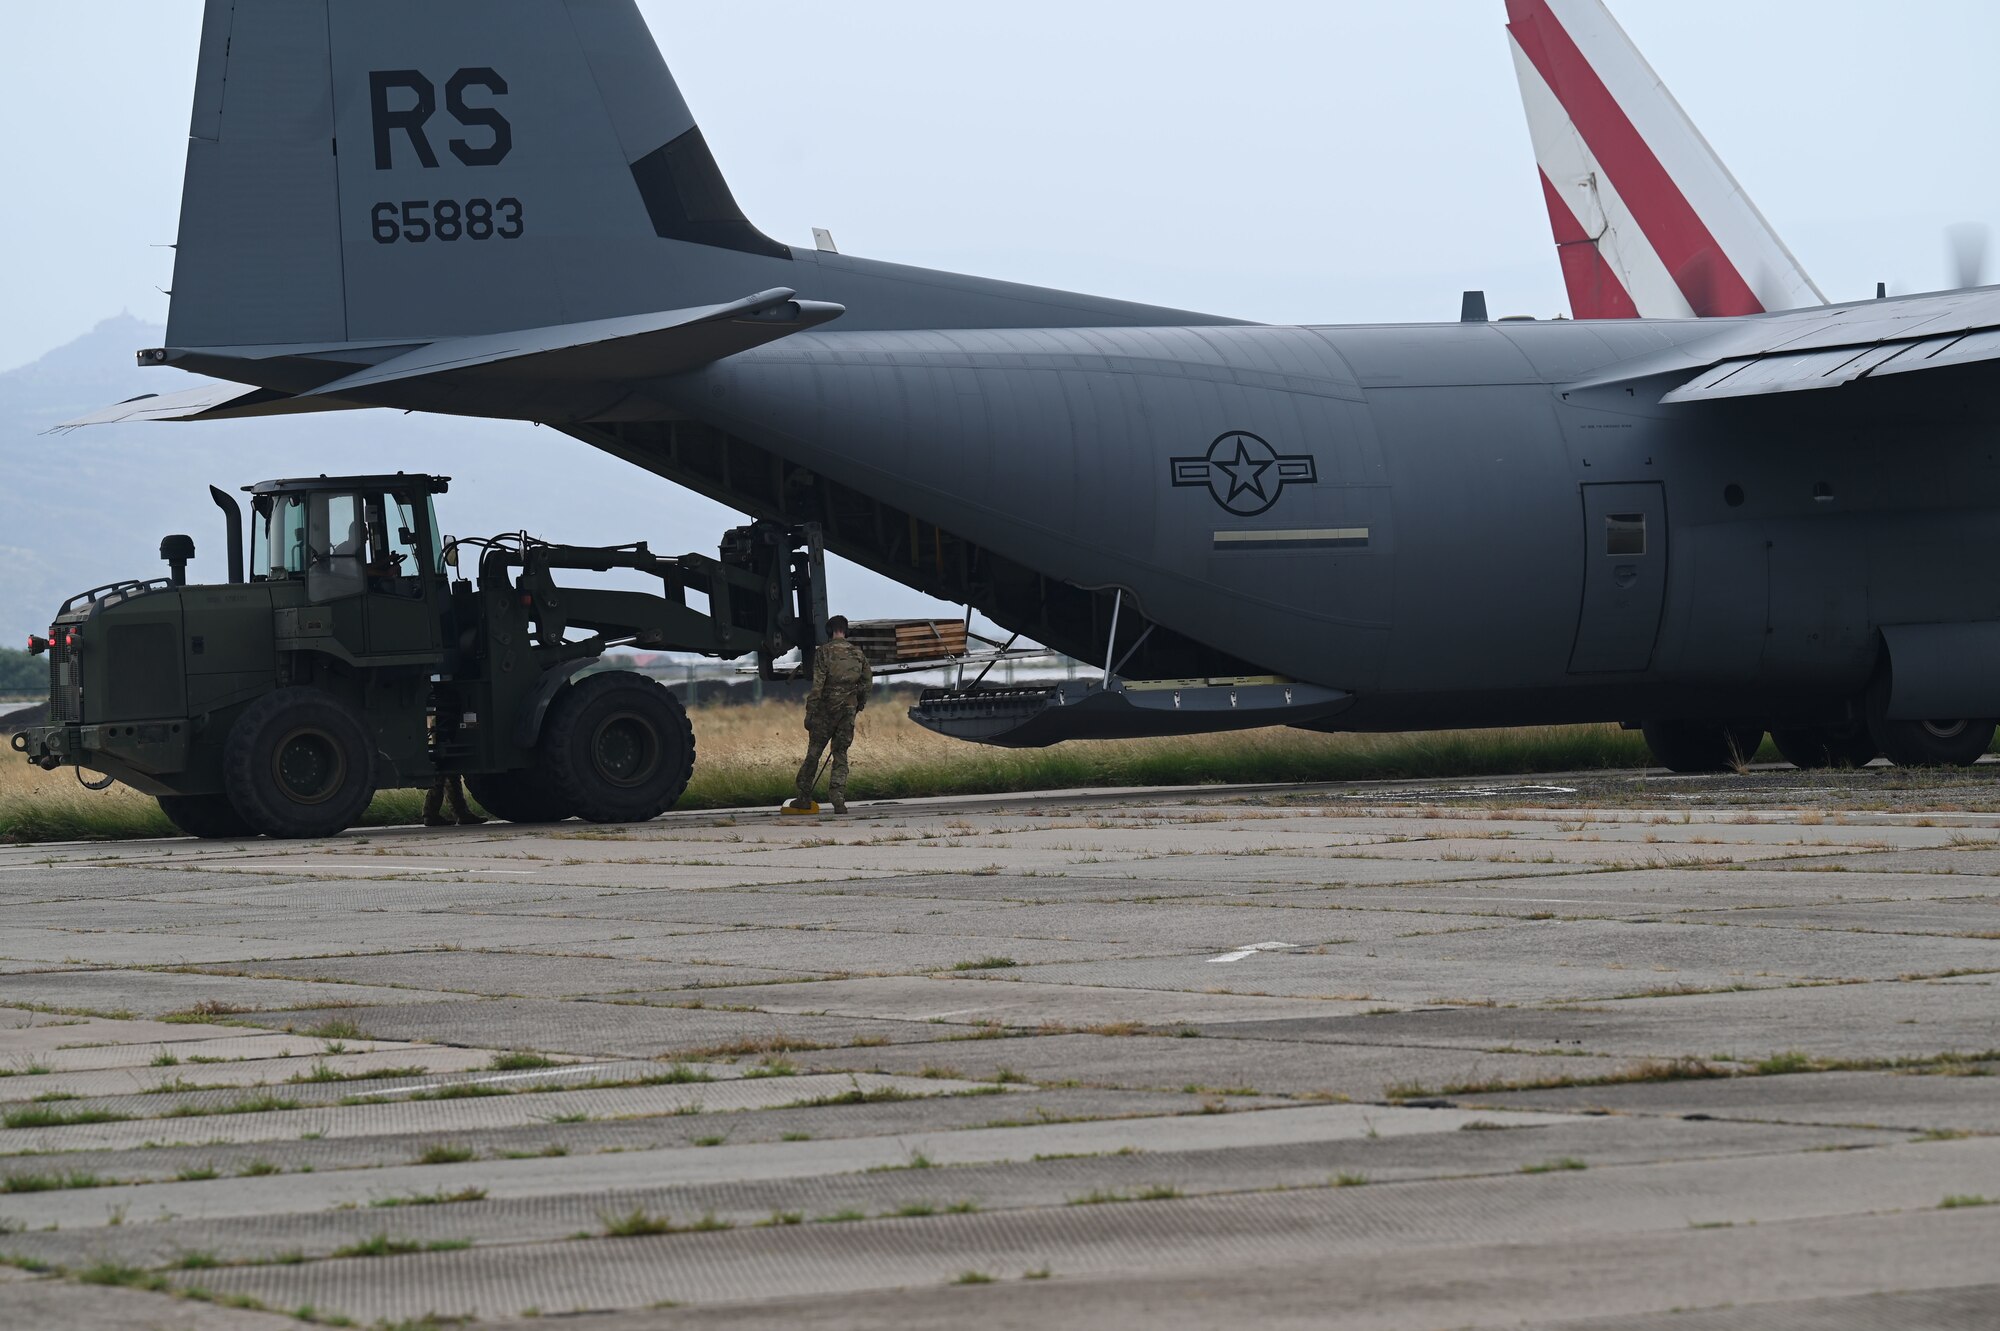 A U.S. Air Force loadmaster assigned to the 37th Airlift Squadron supervises a Georgian military member placing cargo in a U.S. Air Force C-130J Super Hercules aircraft during exercise Agile Spirit 21